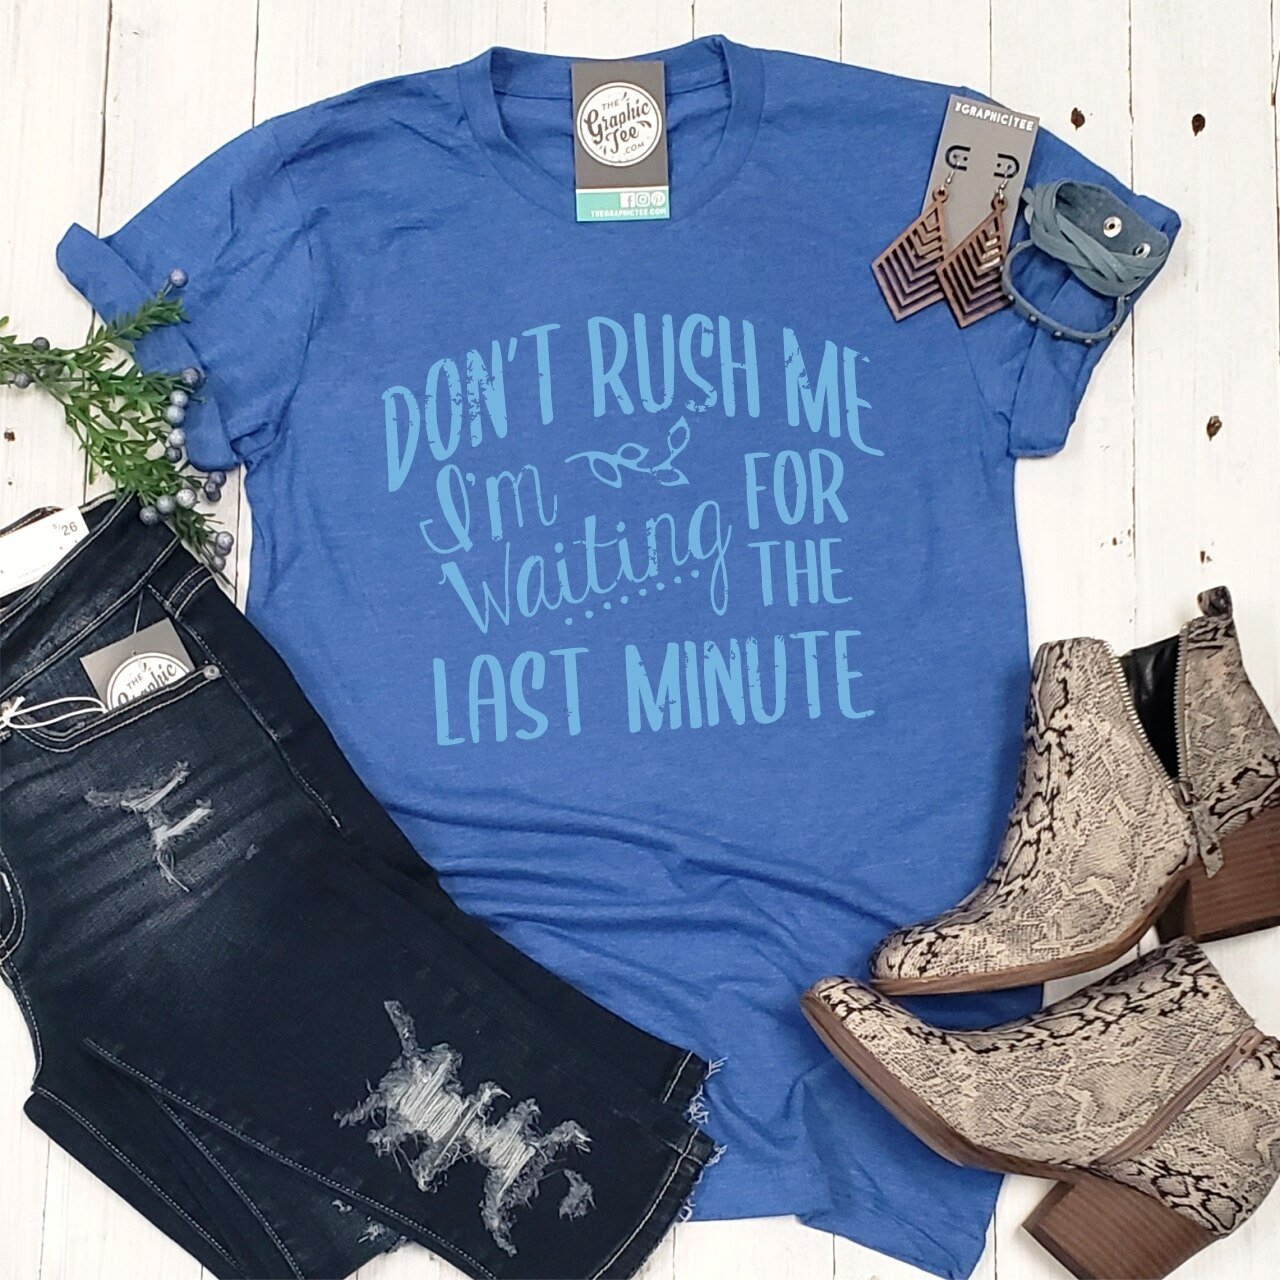 Don't Rush Me I'm Waiting For the Last Minute - Unisex Tee - The Graphic Tee